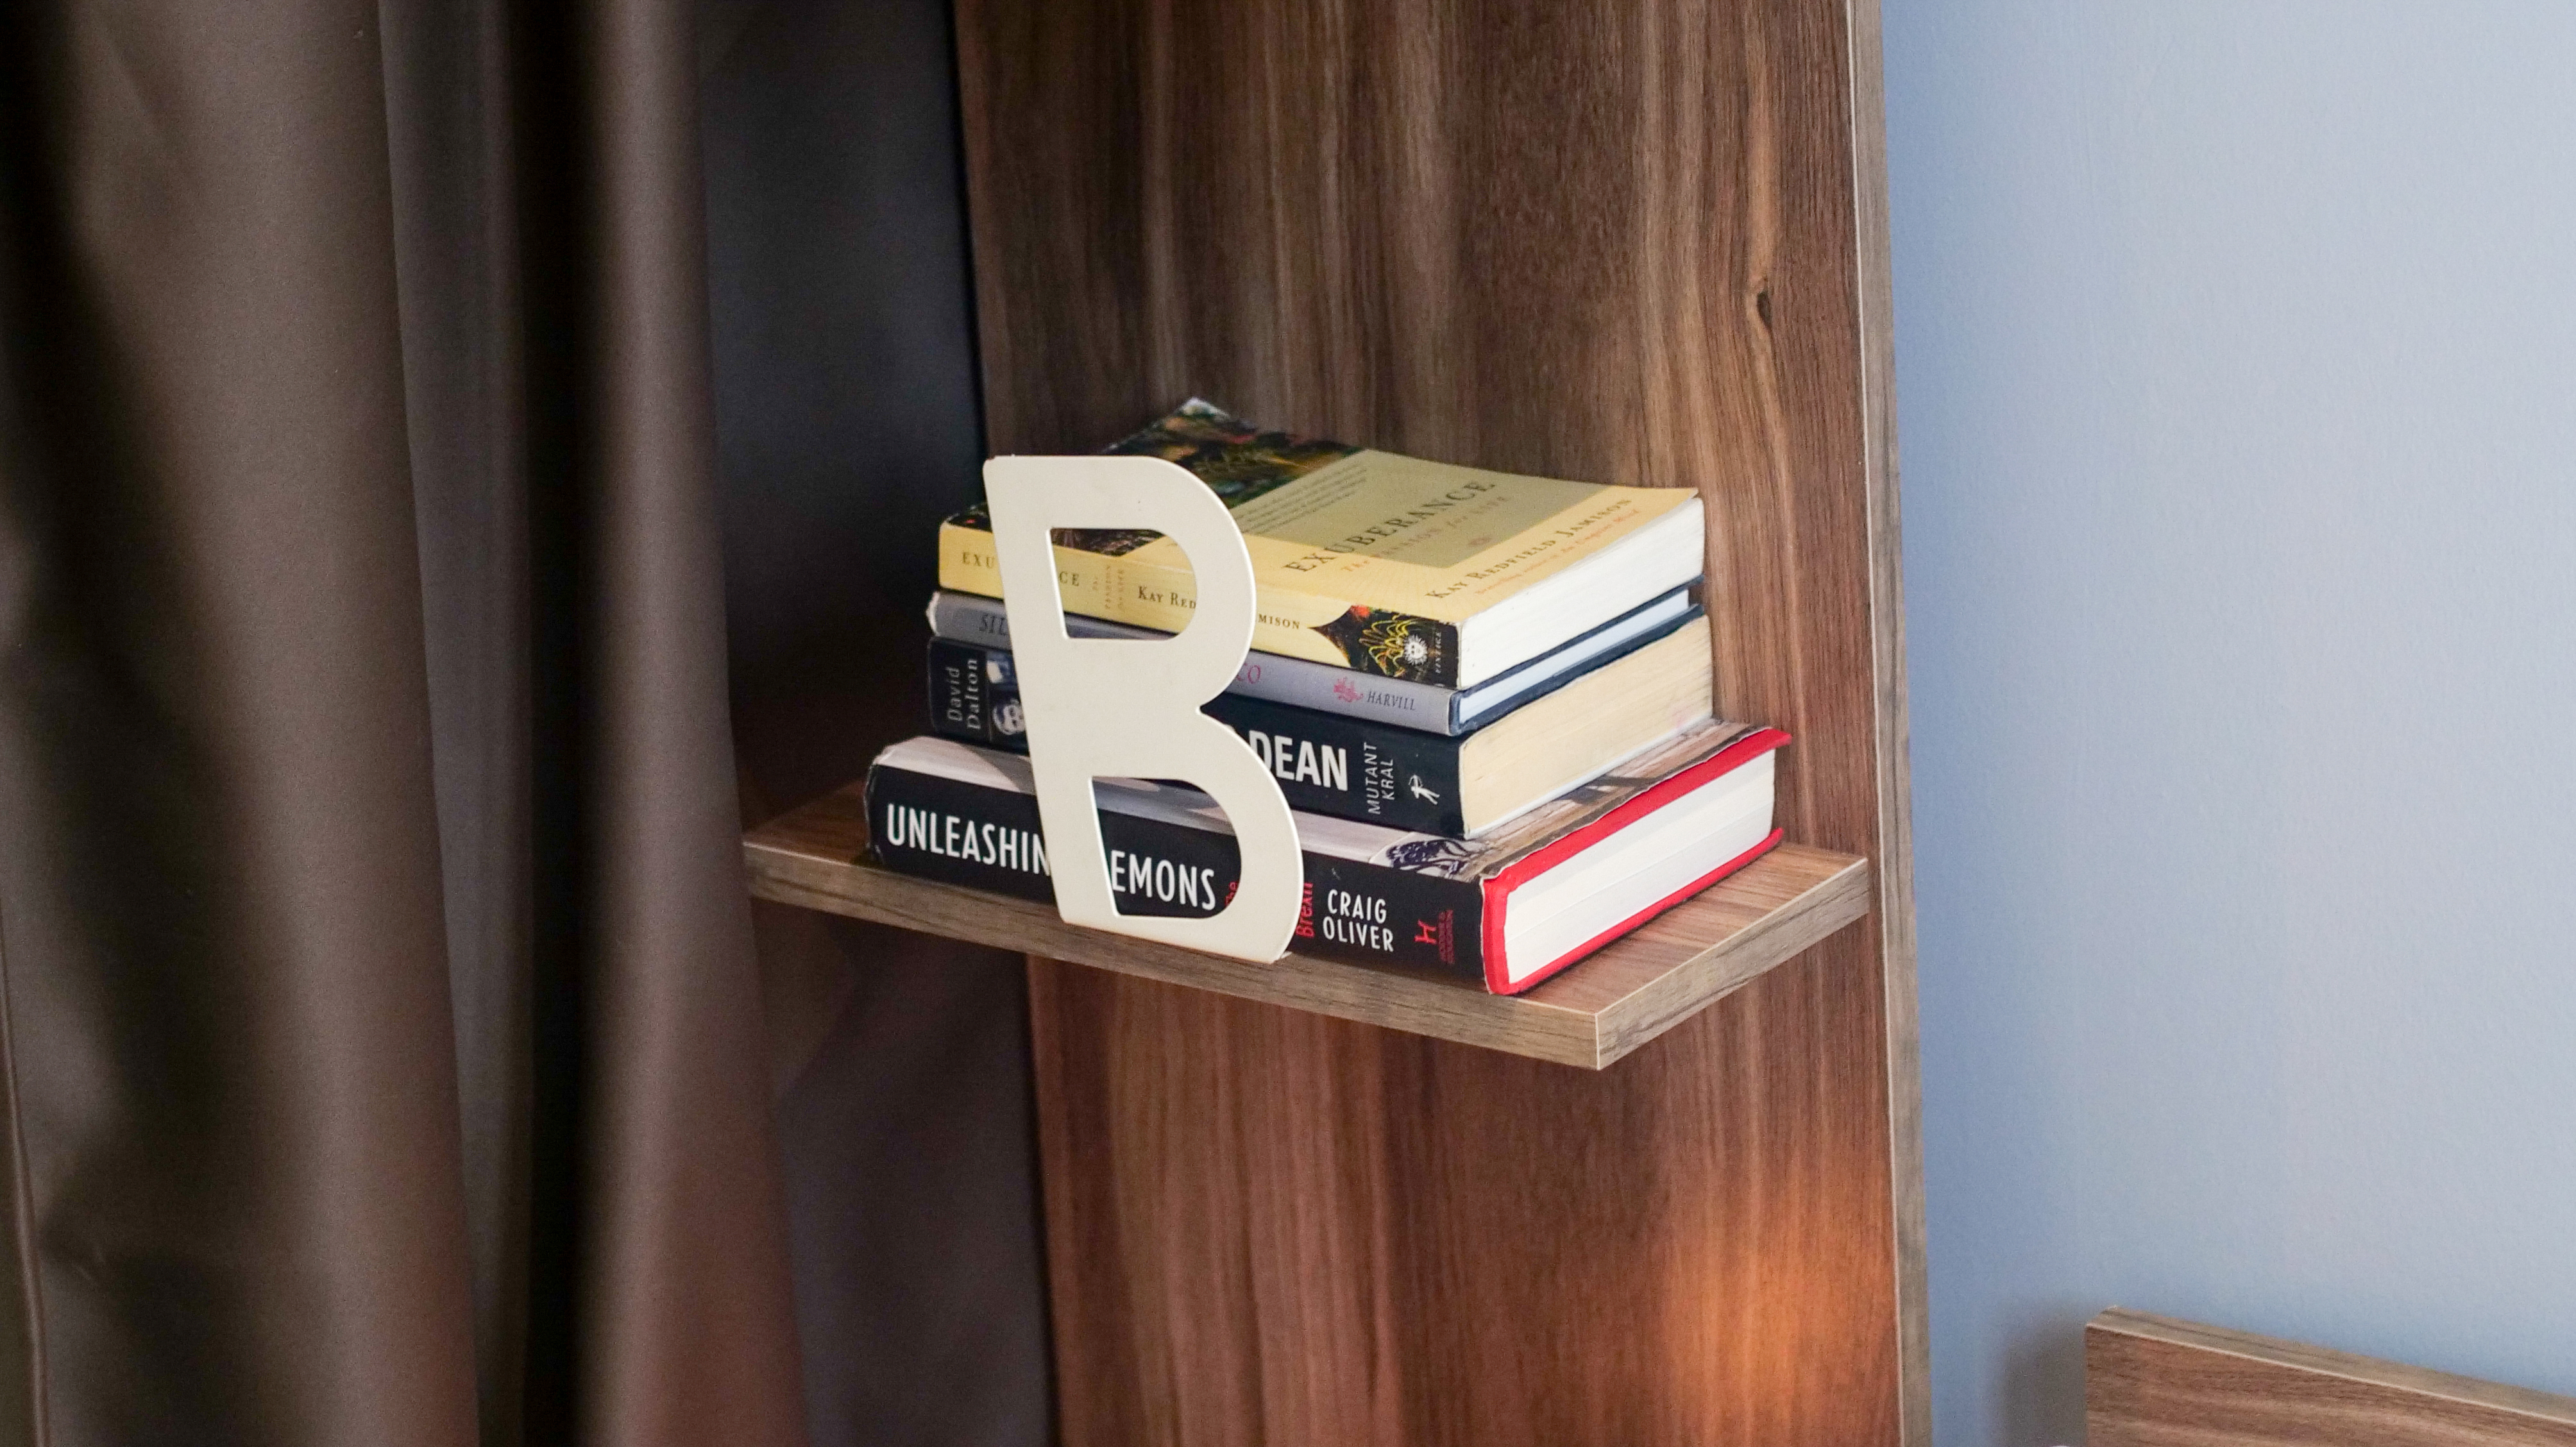 The guests can find bookstand in the double rooms.